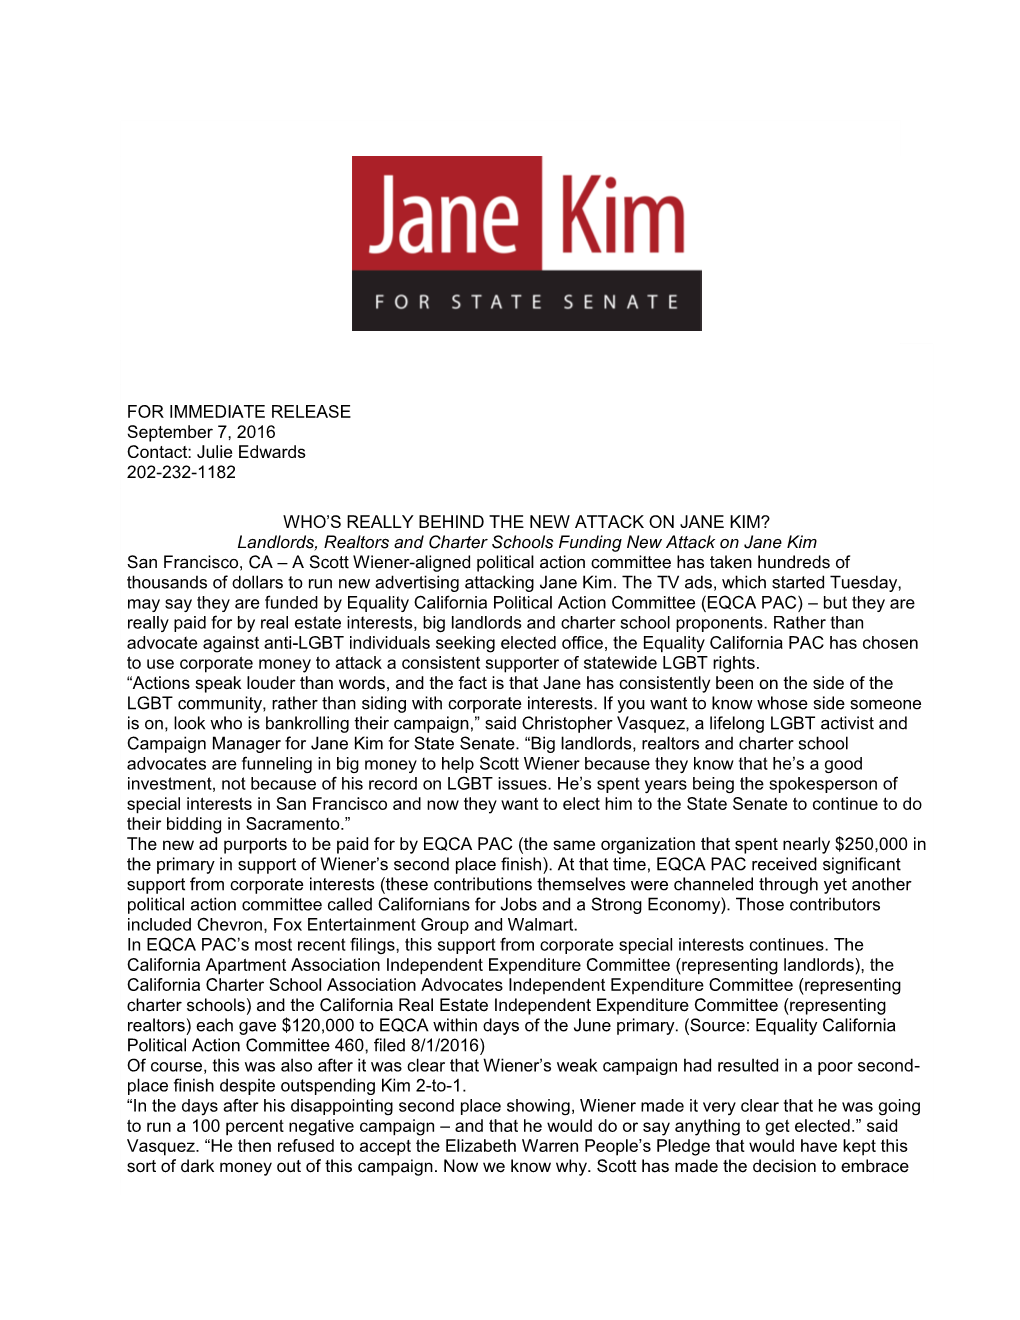 FOR IMMEDIATE RELEASE September 7, 2016 Contact: Julie Edwards 202-232-1182 WHO's REALLY BEHIND the NEW ATTACK on JANE KIM? La